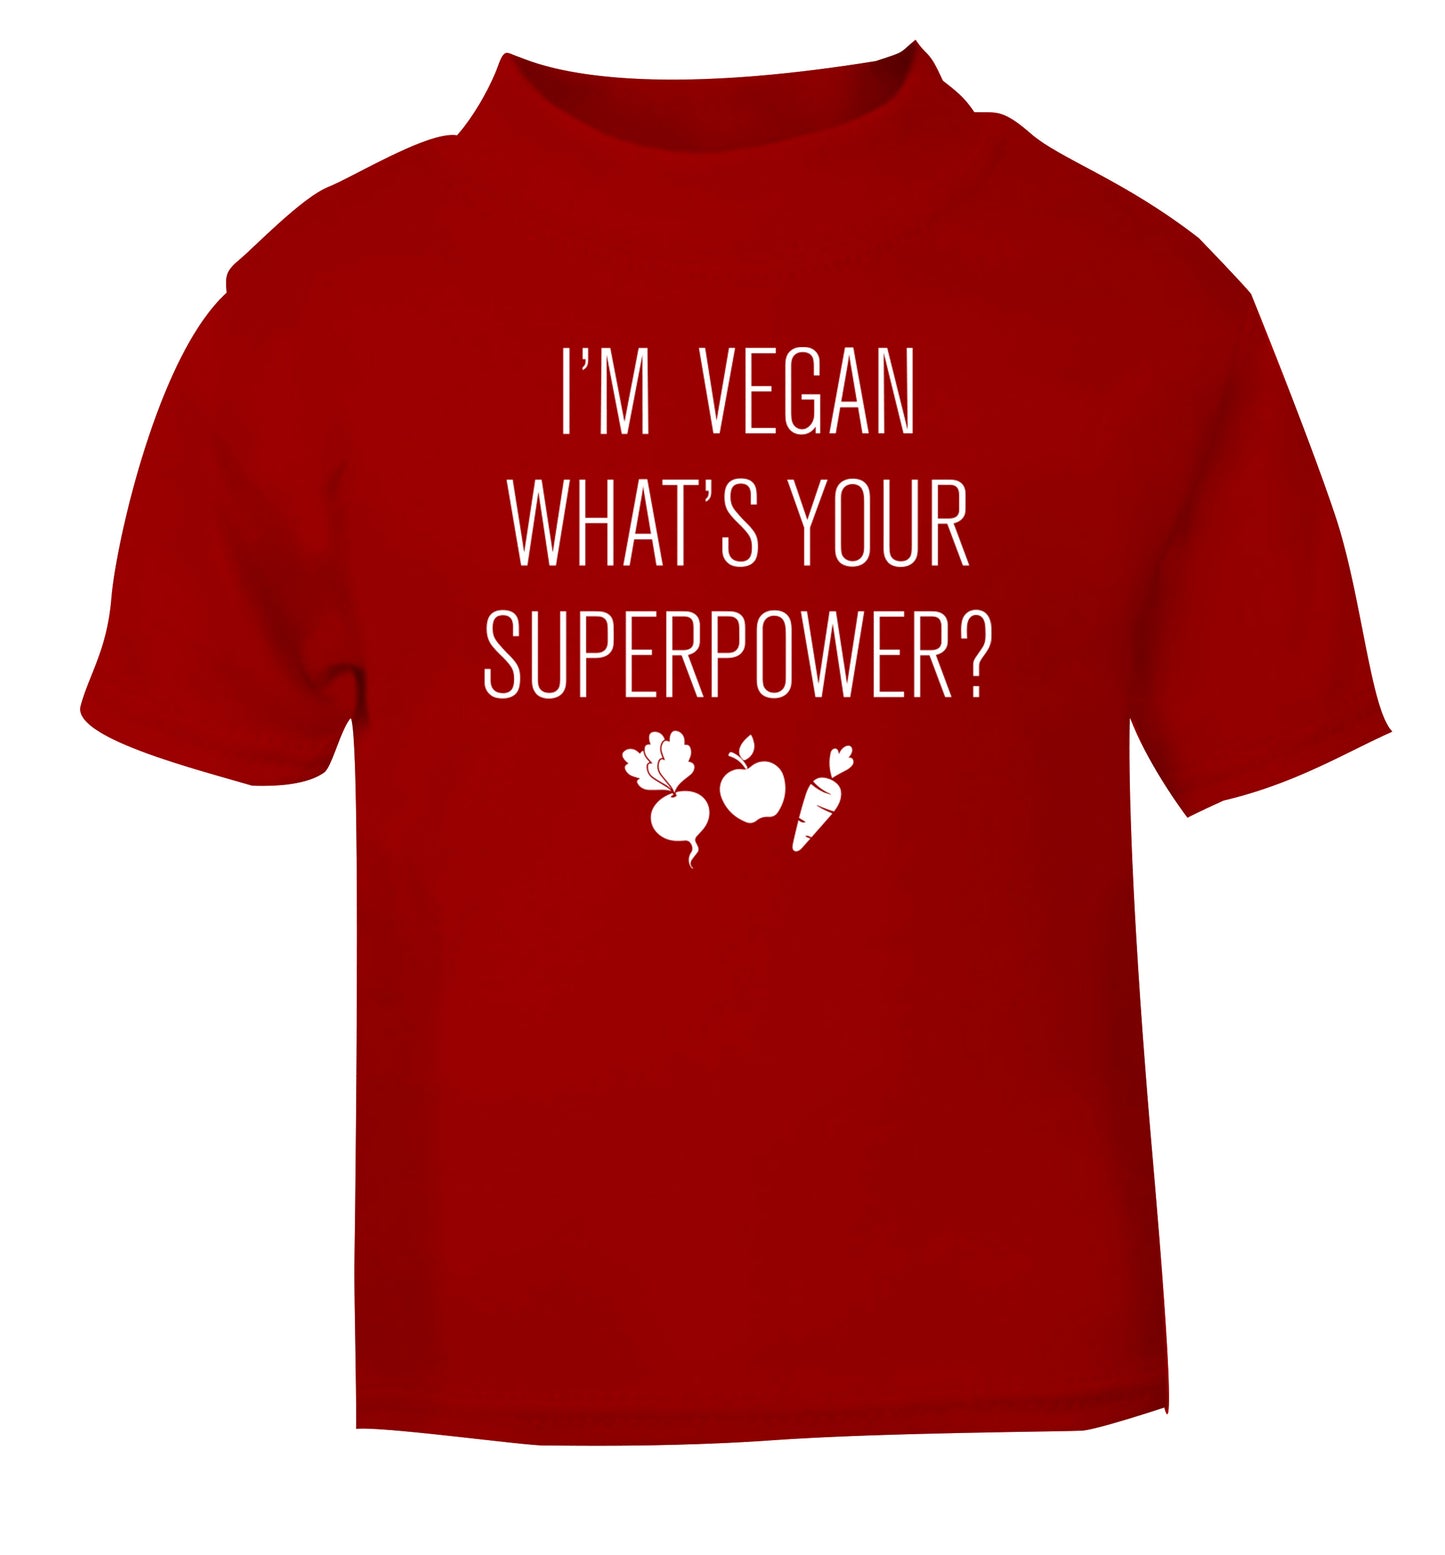 I'm Vegan What's Your Superpower? red Baby Toddler Tshirt 2 Years